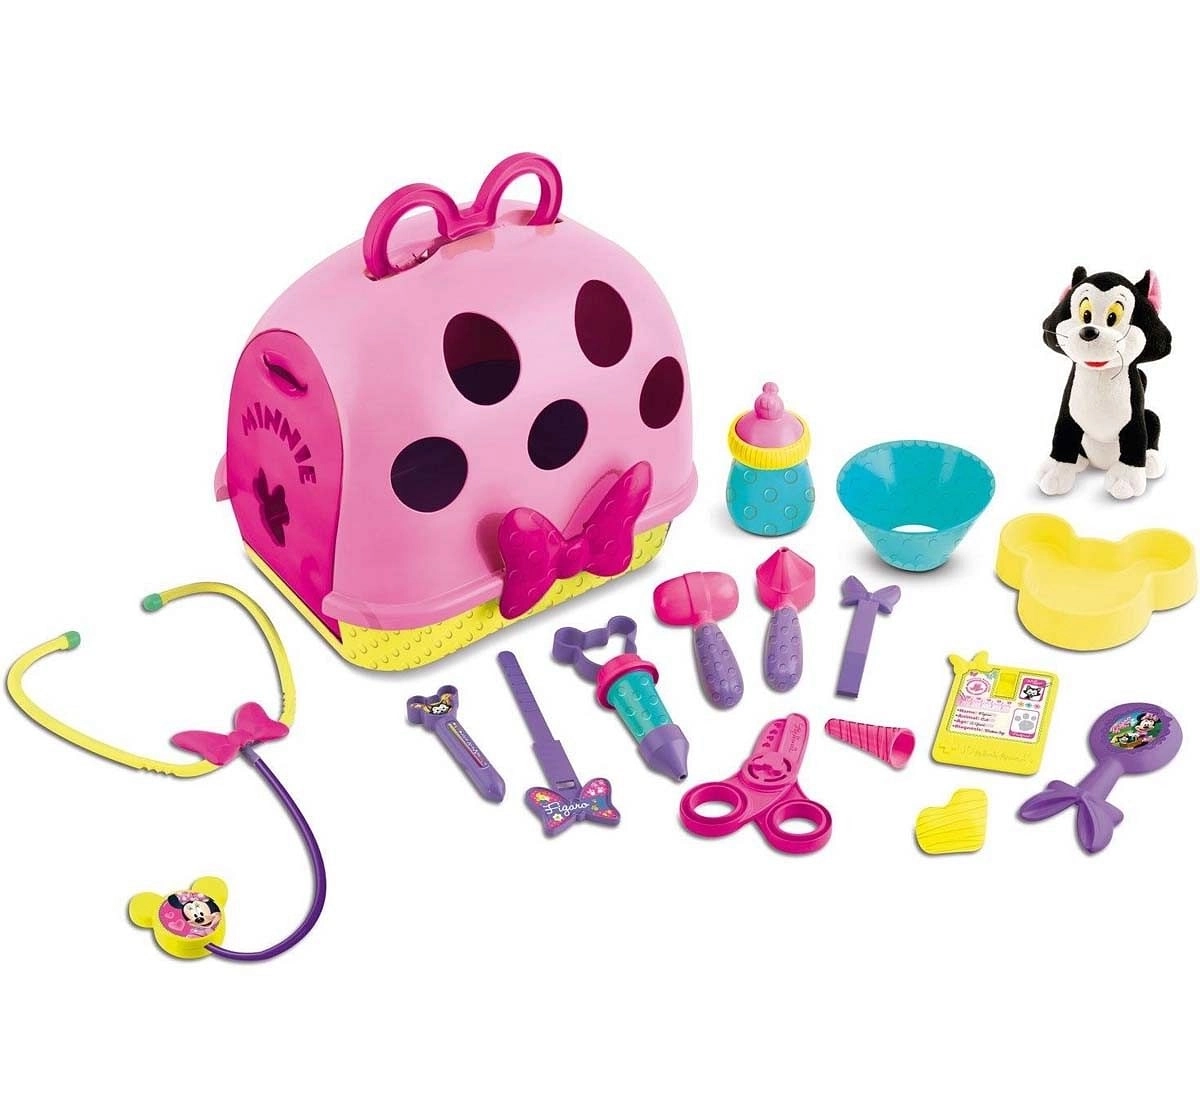 Imc Toys Disney Minnie Vet Set Roleplay Sets for Kids Age 3Y+